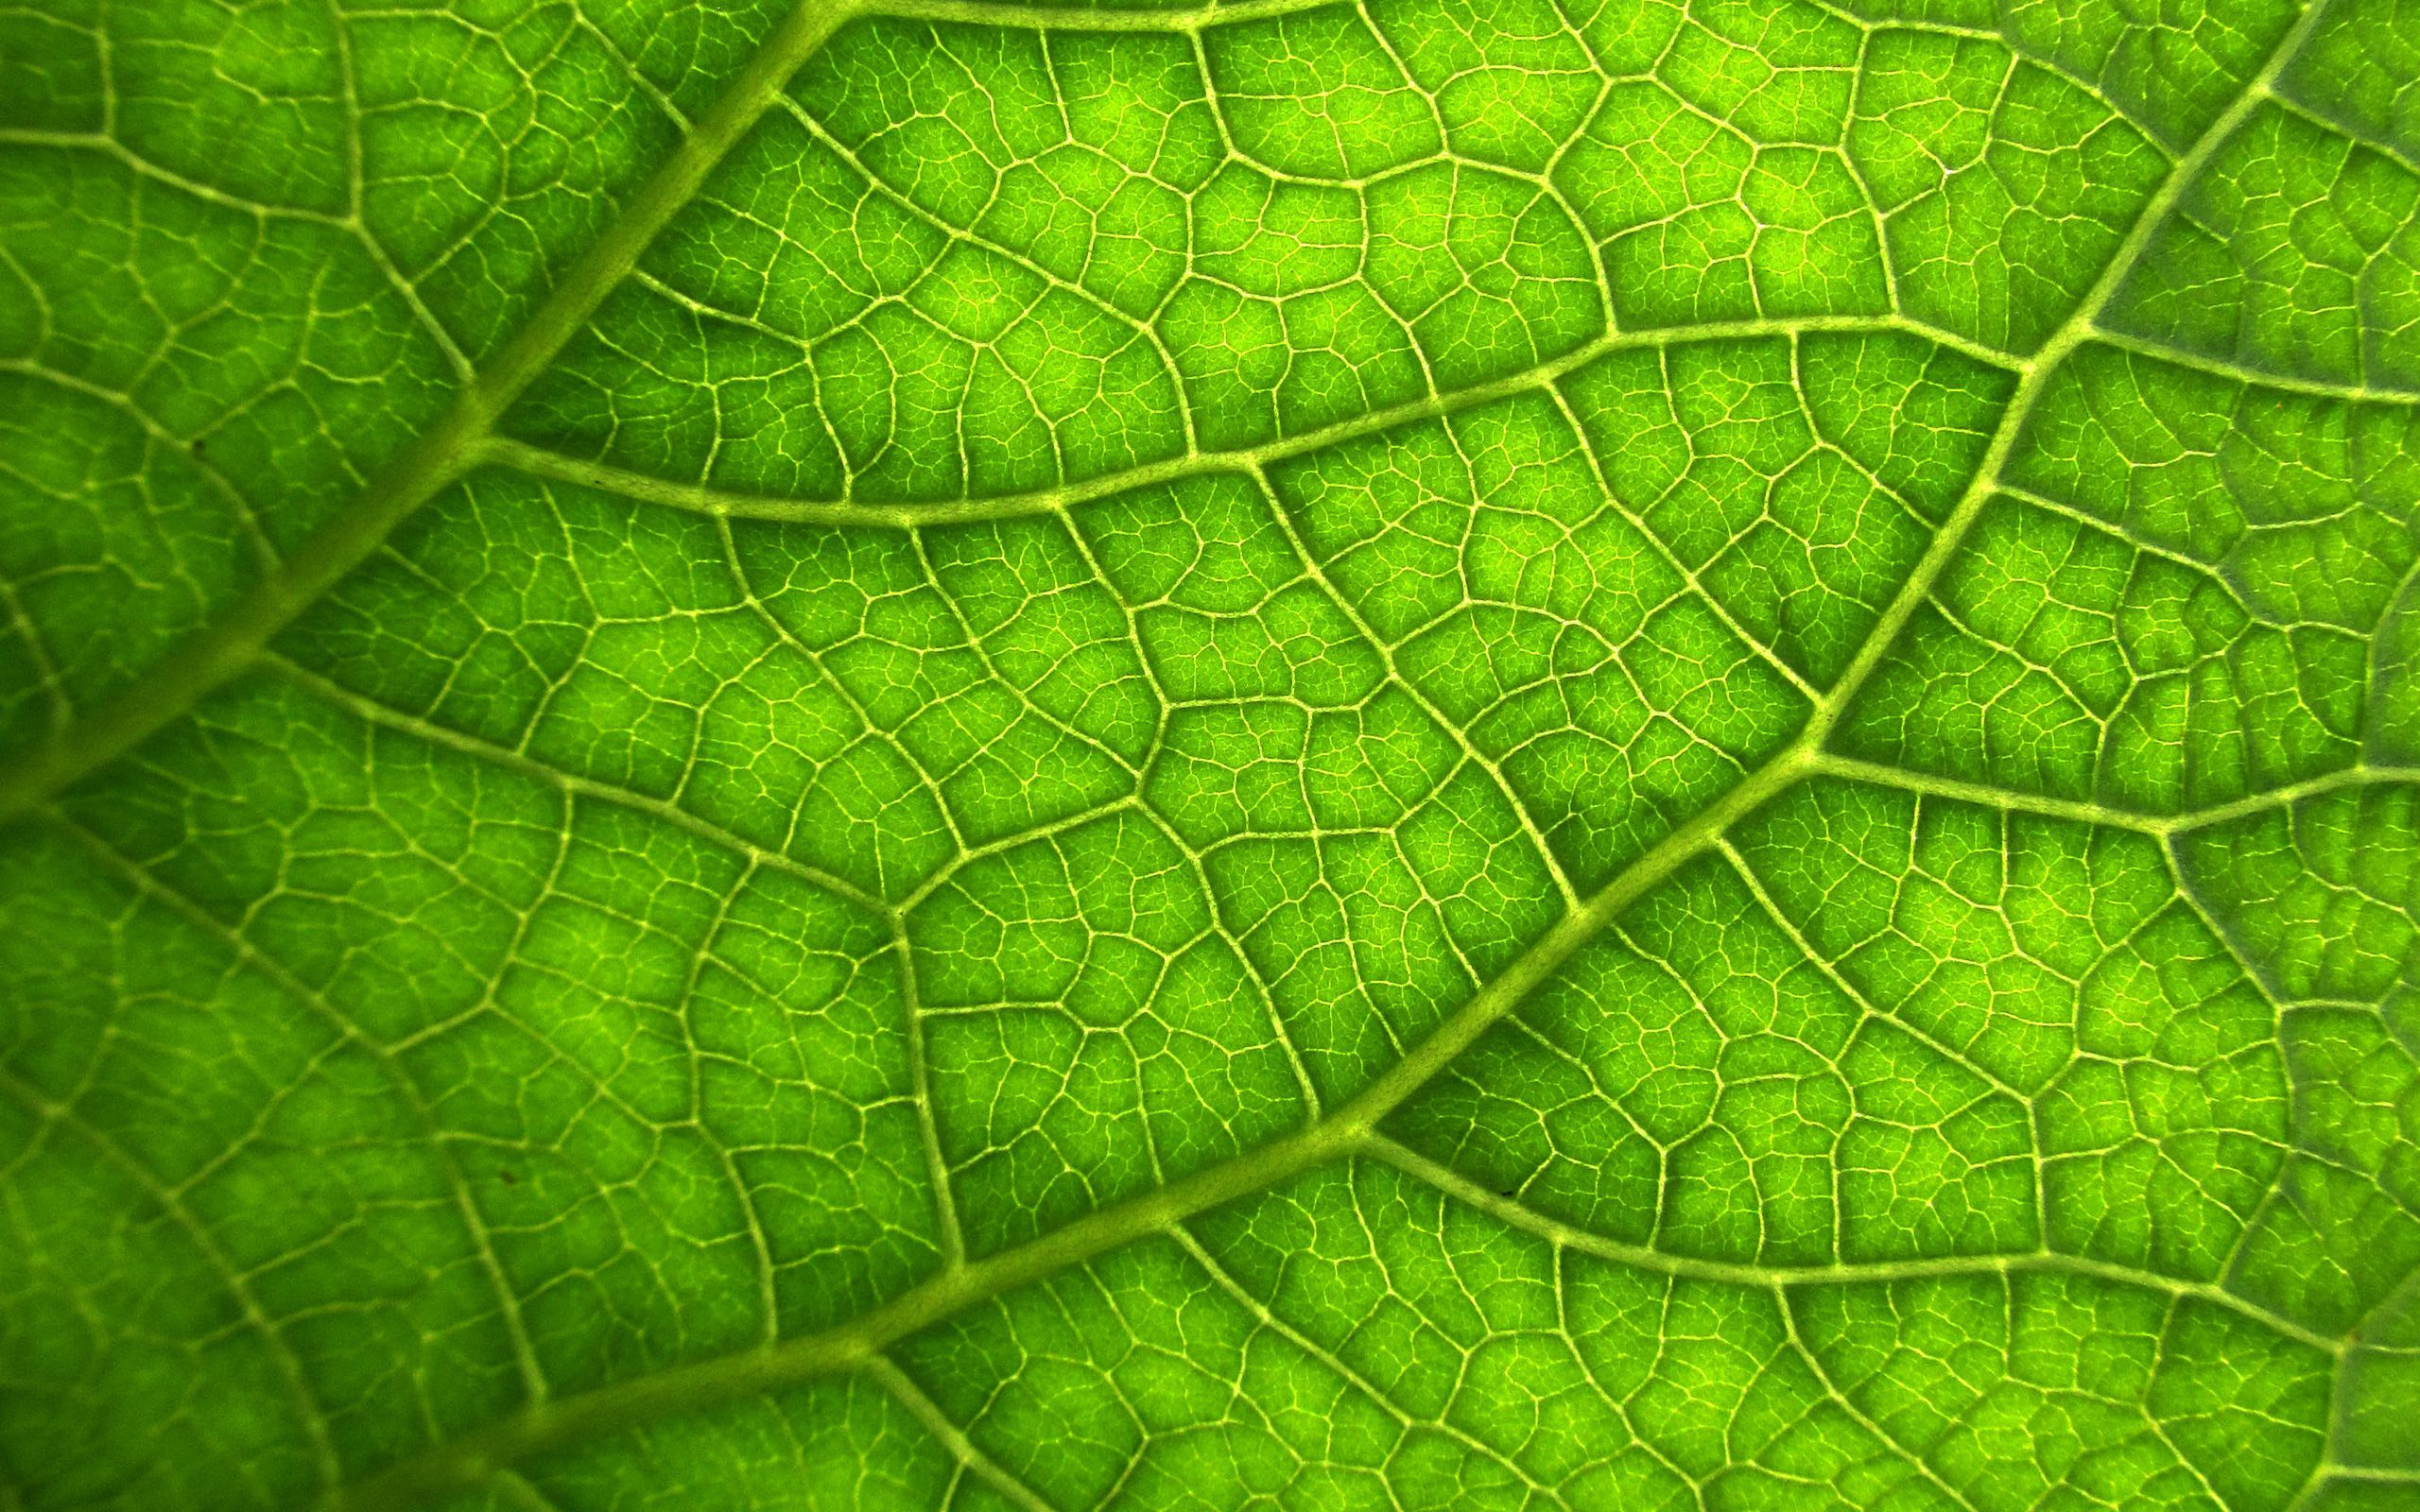 Macro 4K wallpaper for your desktop or mobile screen free and easy to download